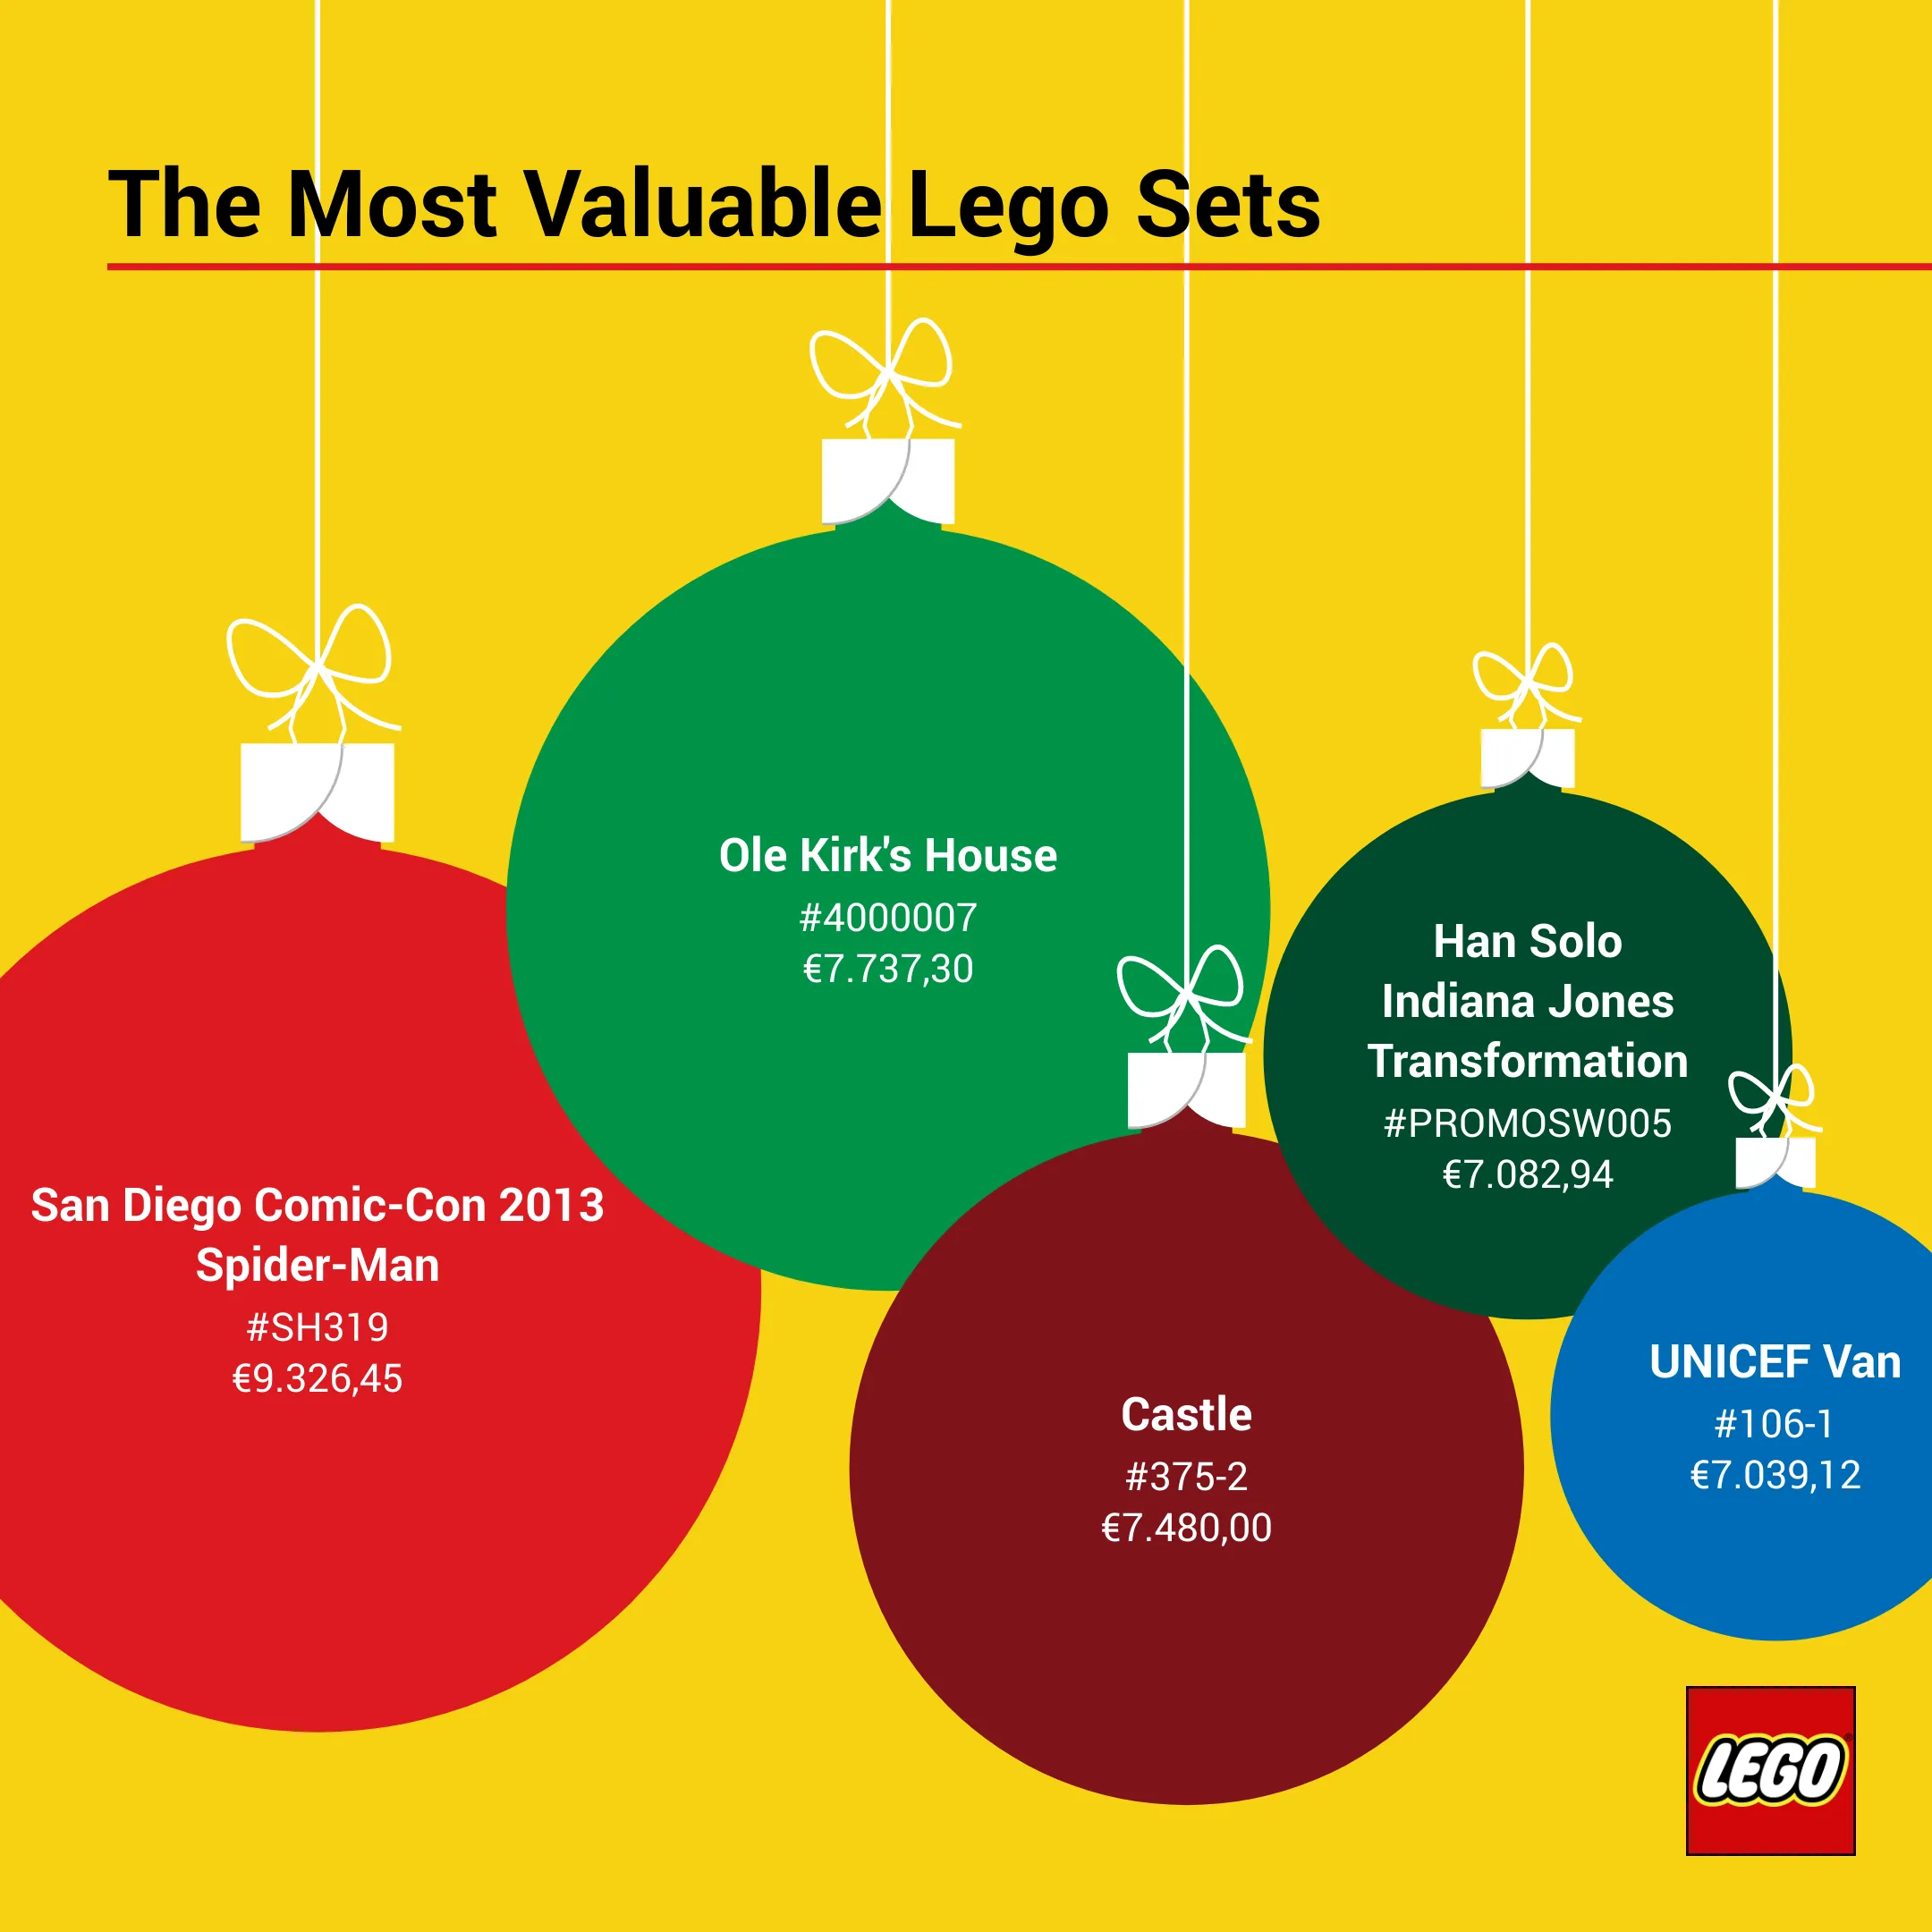 The Most Valuable Lego Sets